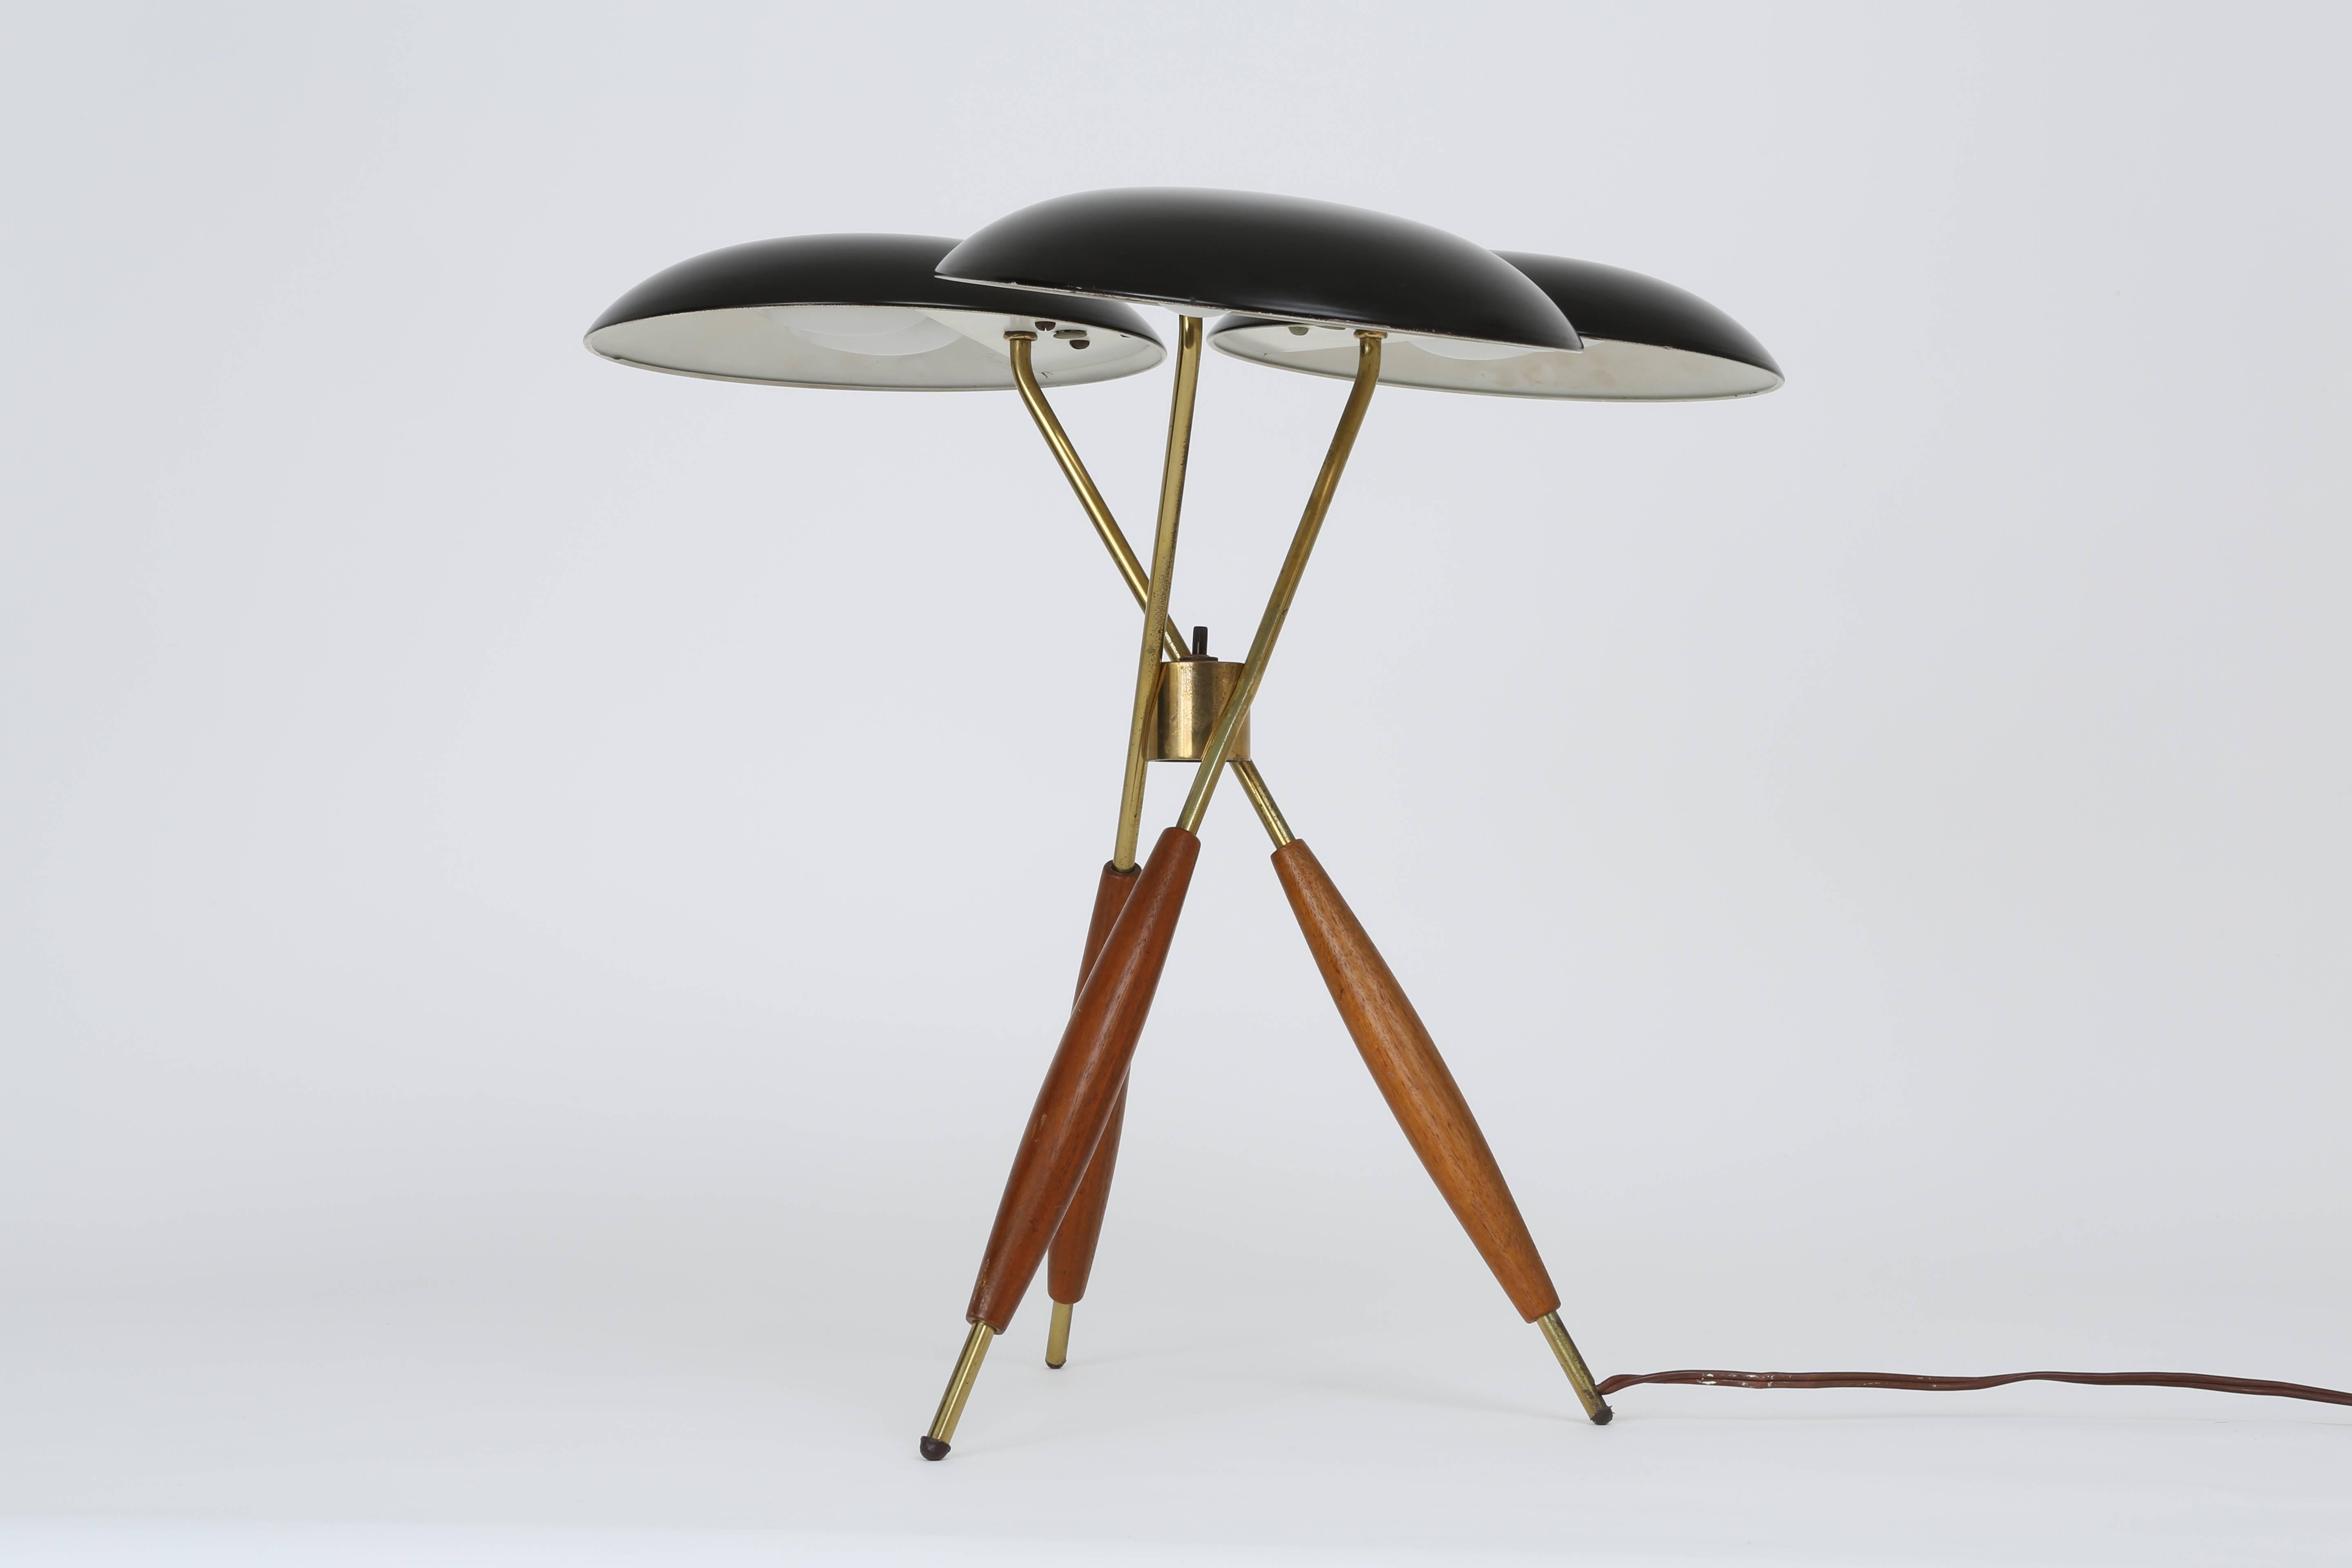 Gerald Thurston table lamp for Lightolier.
Made with brass, walnut and enameled metal.